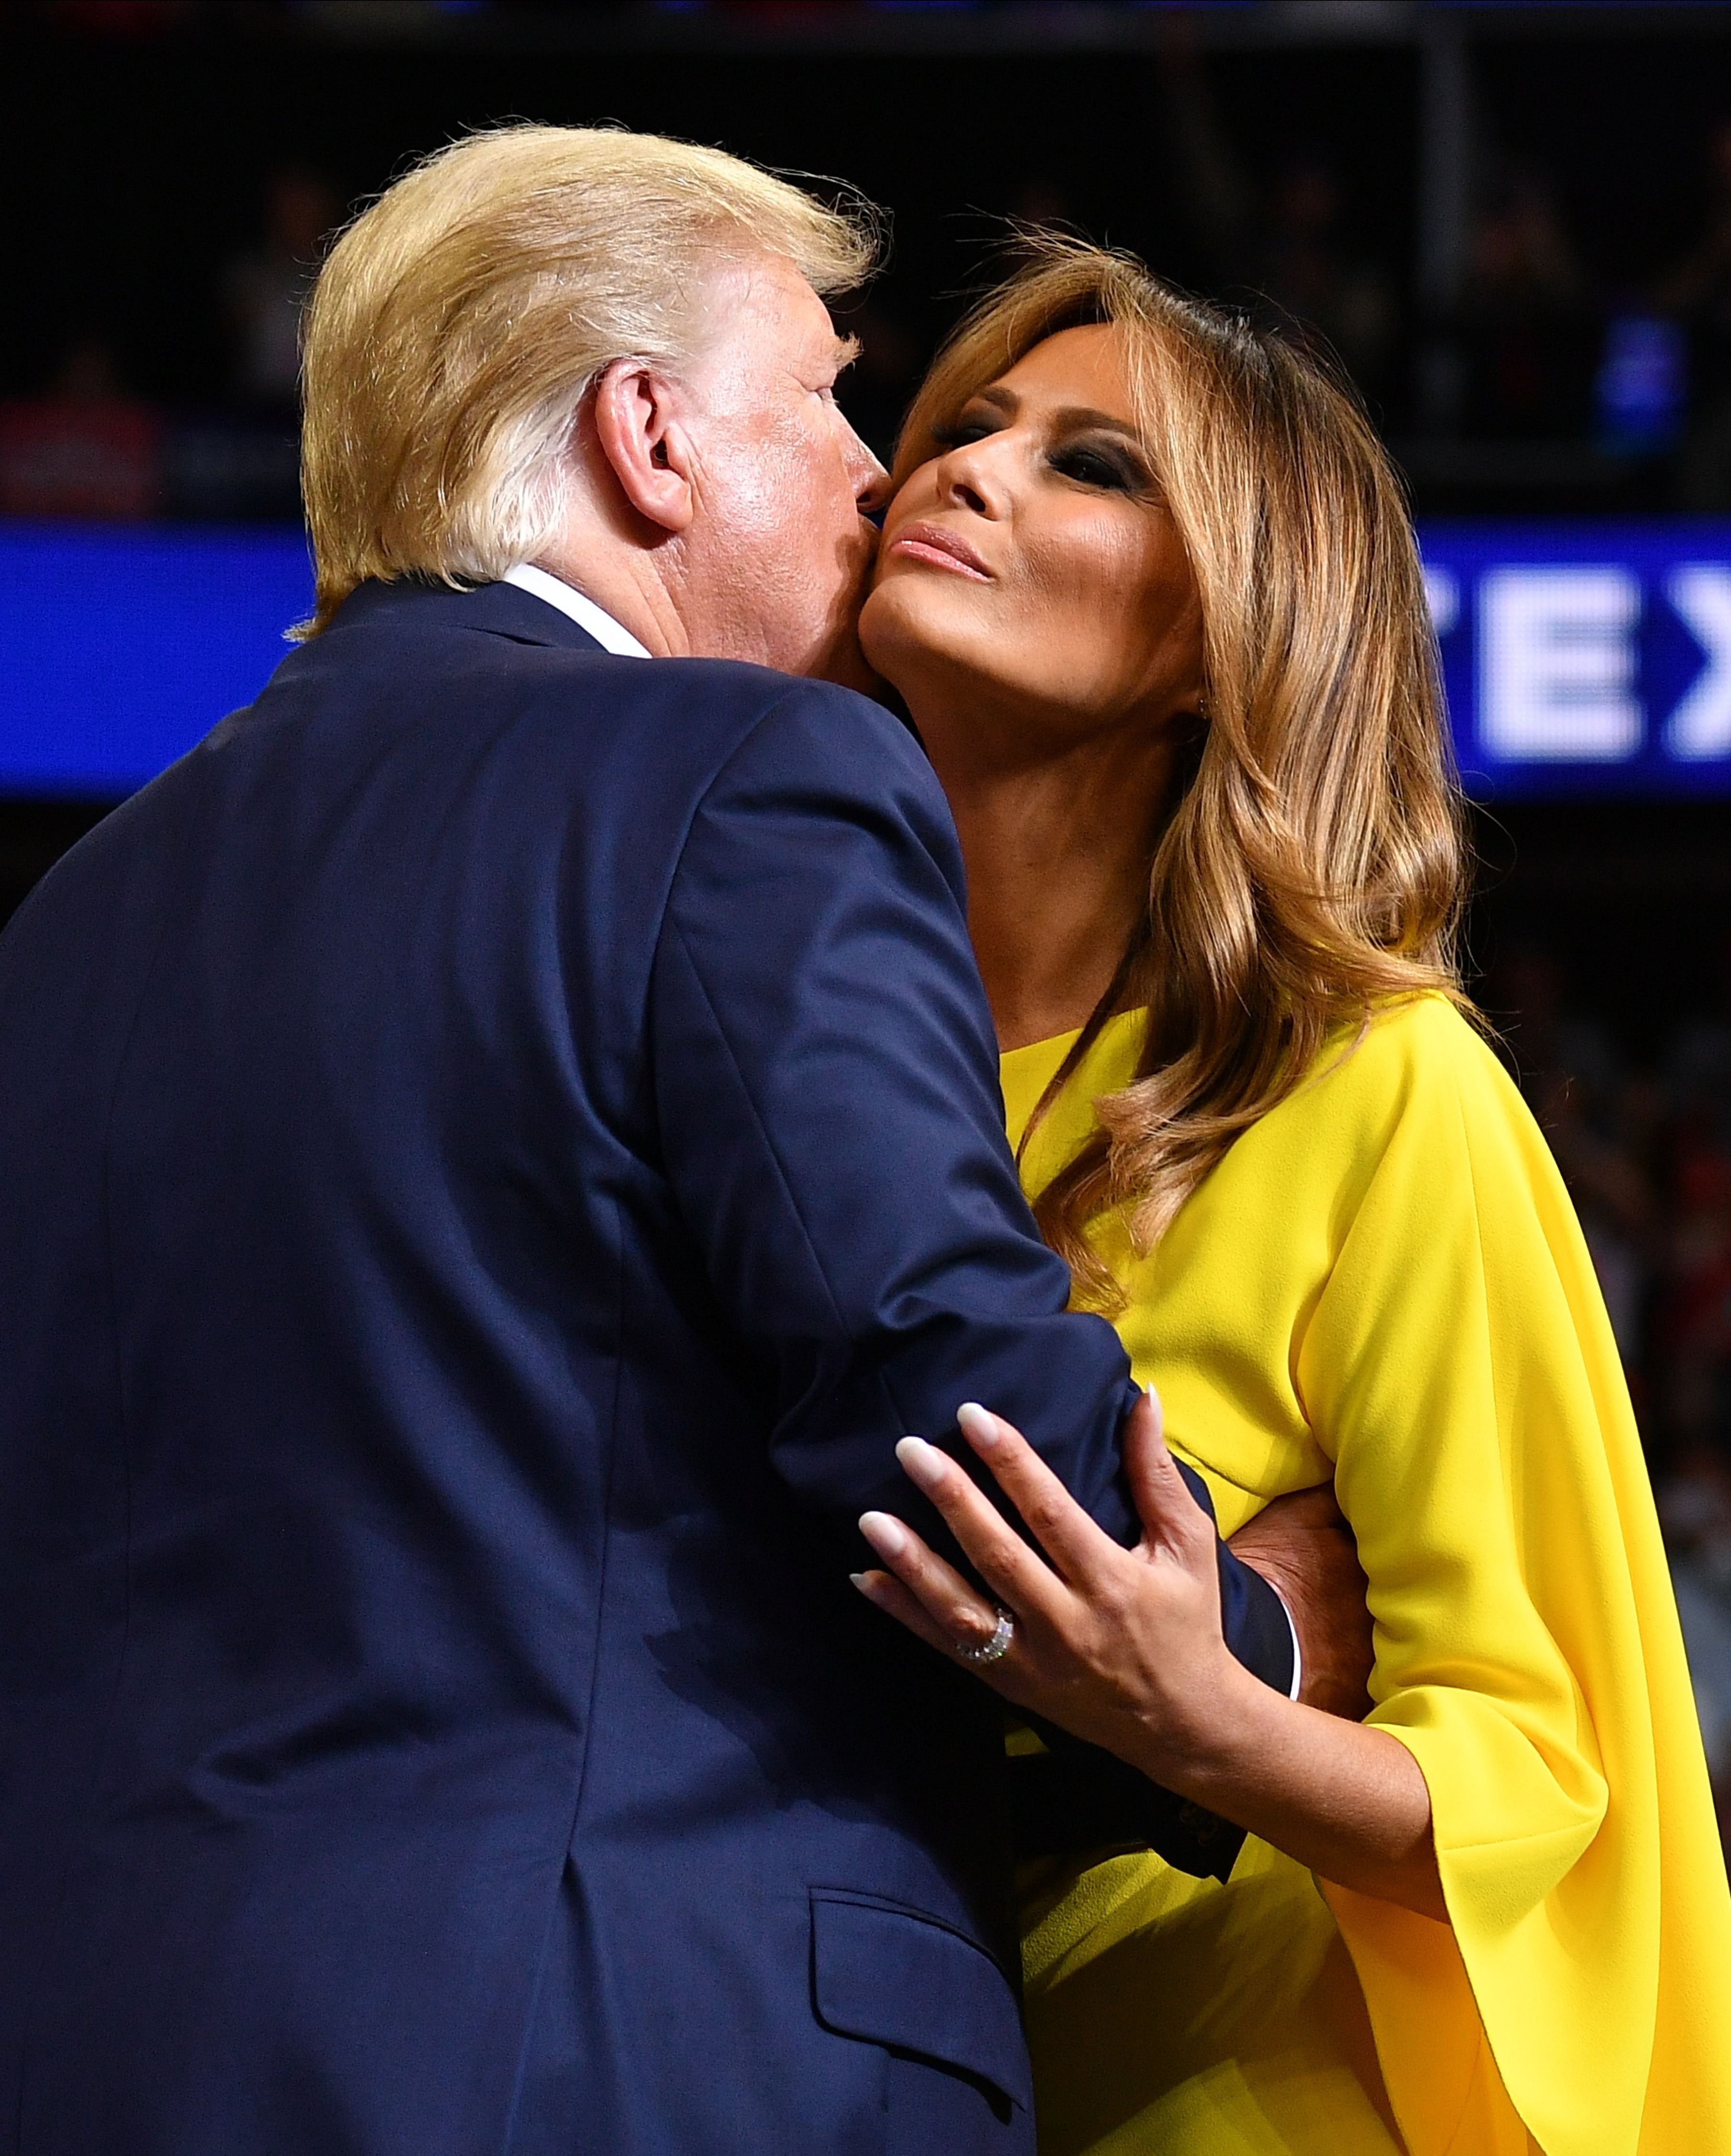 Trump and First Lady Melania Trump embrace.